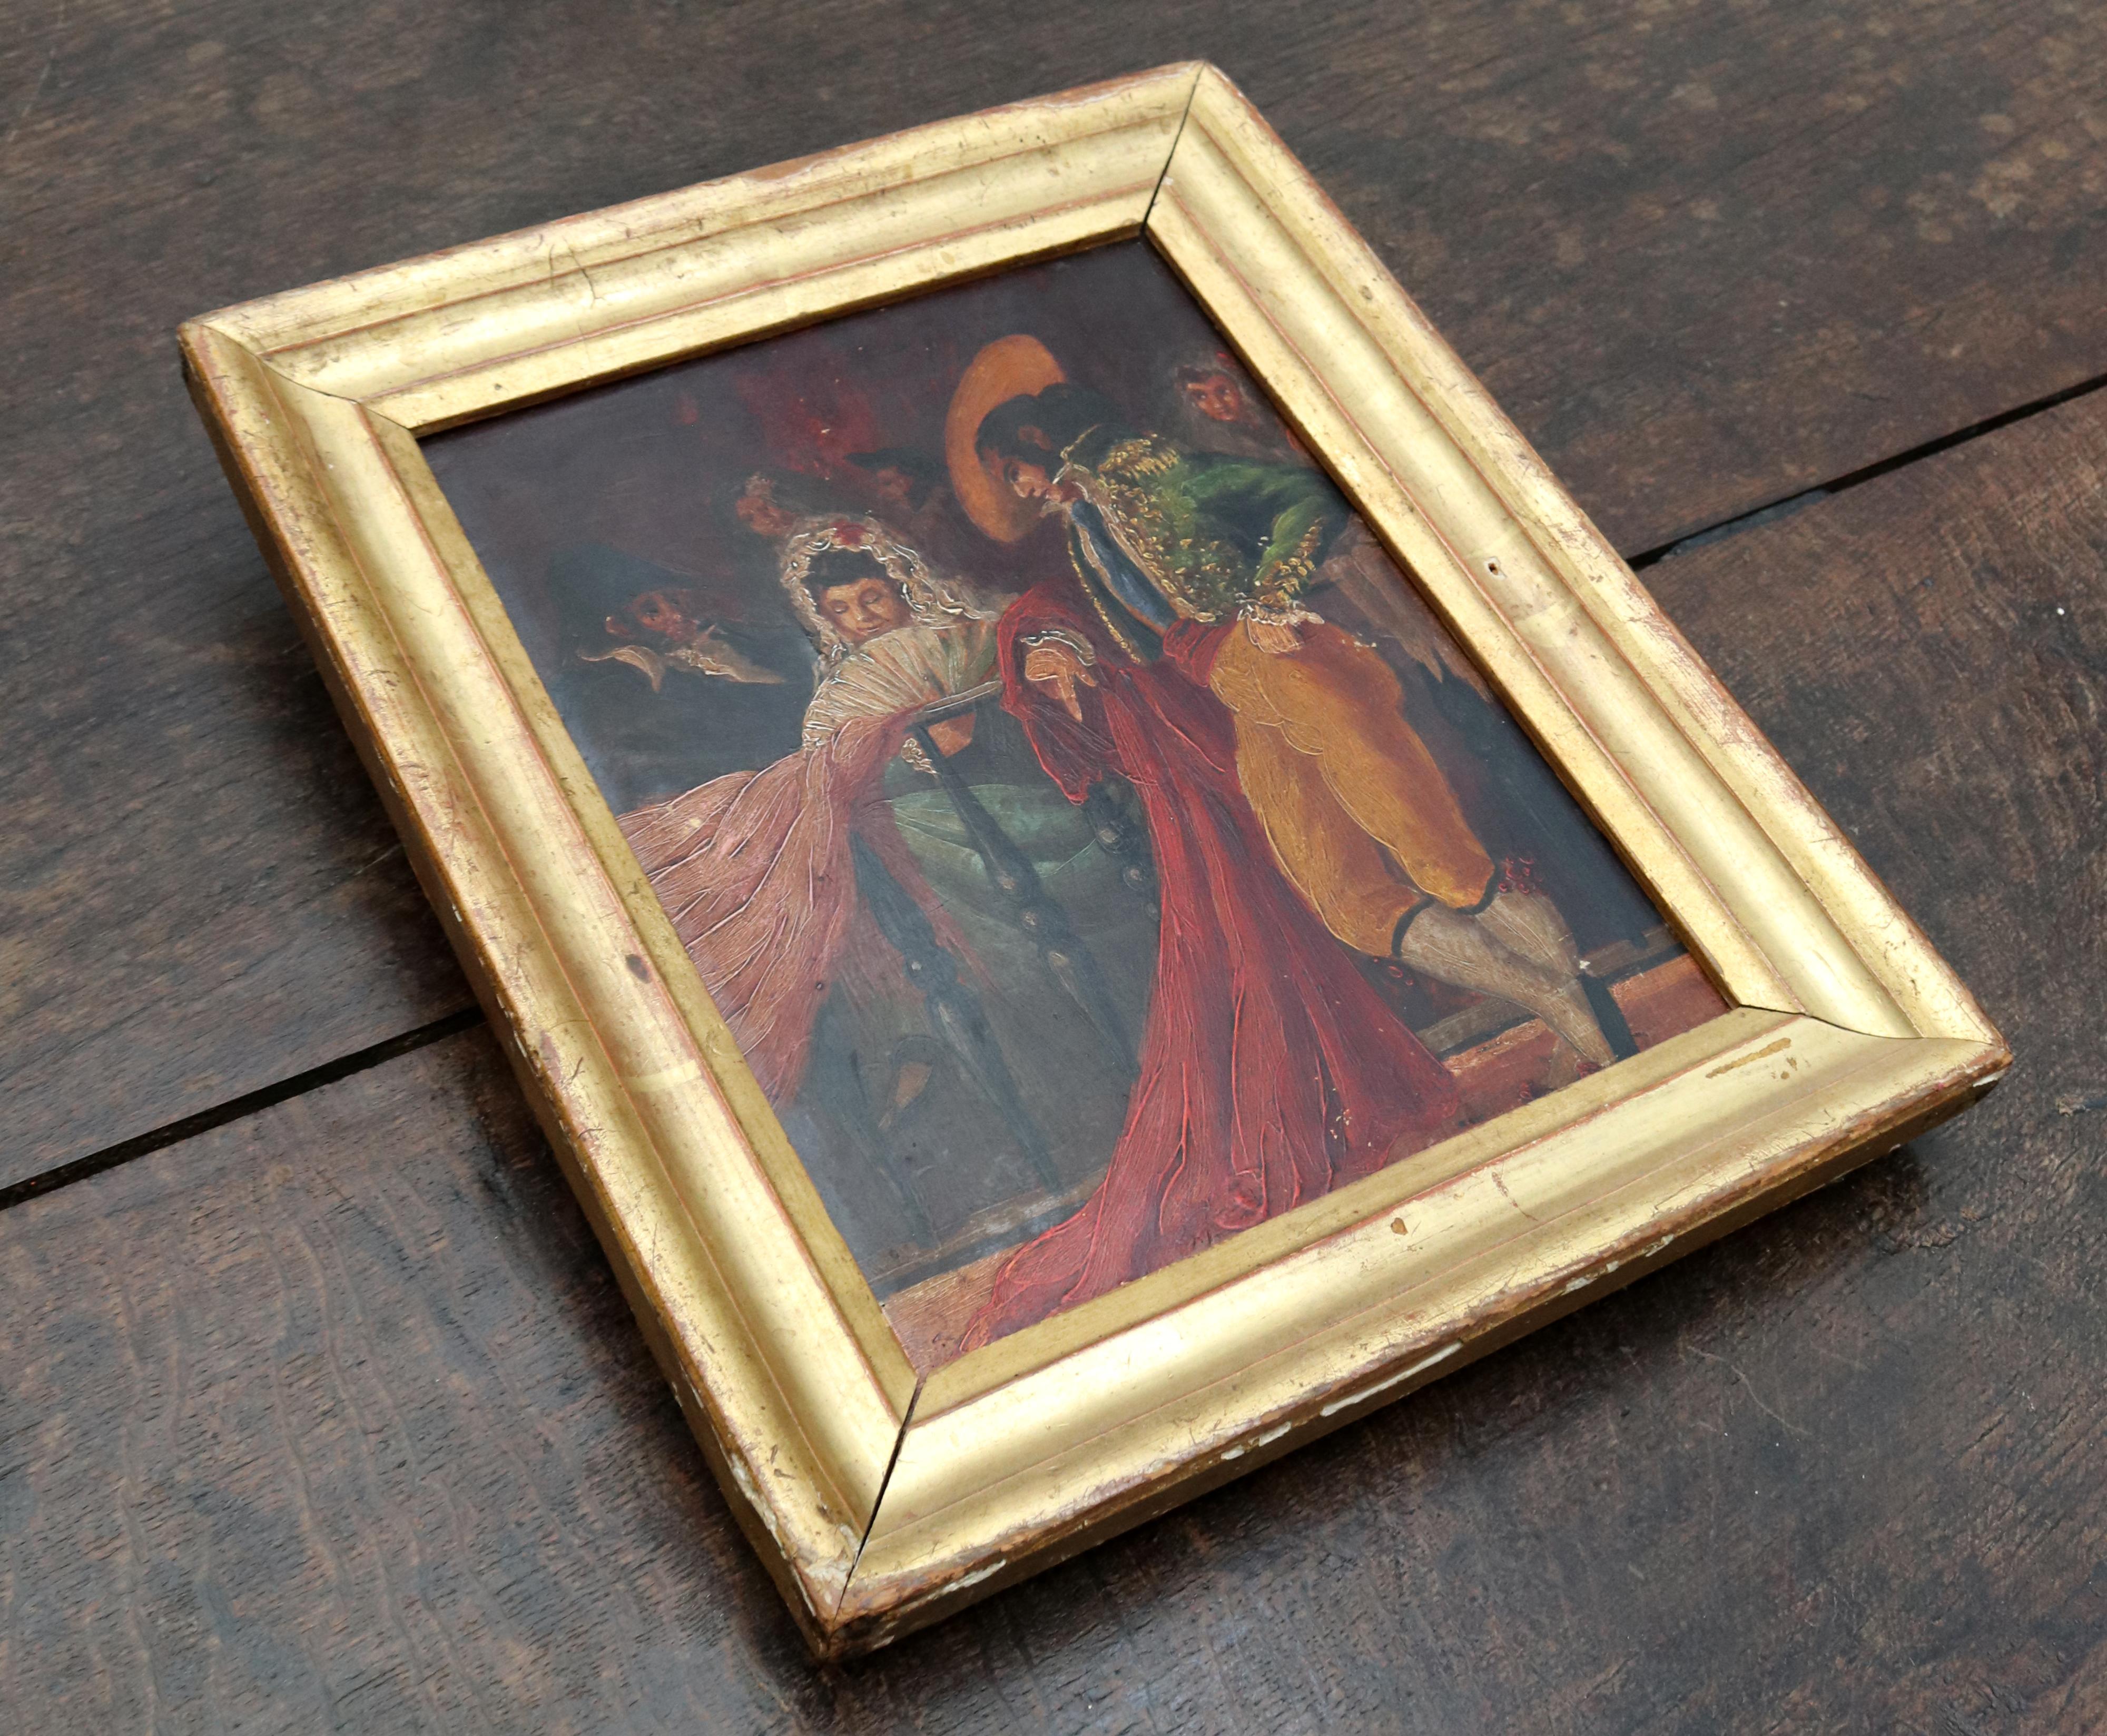 20th Century 19th Century Spanish Oil on Wood Painting in Bullfighter Style For Sale